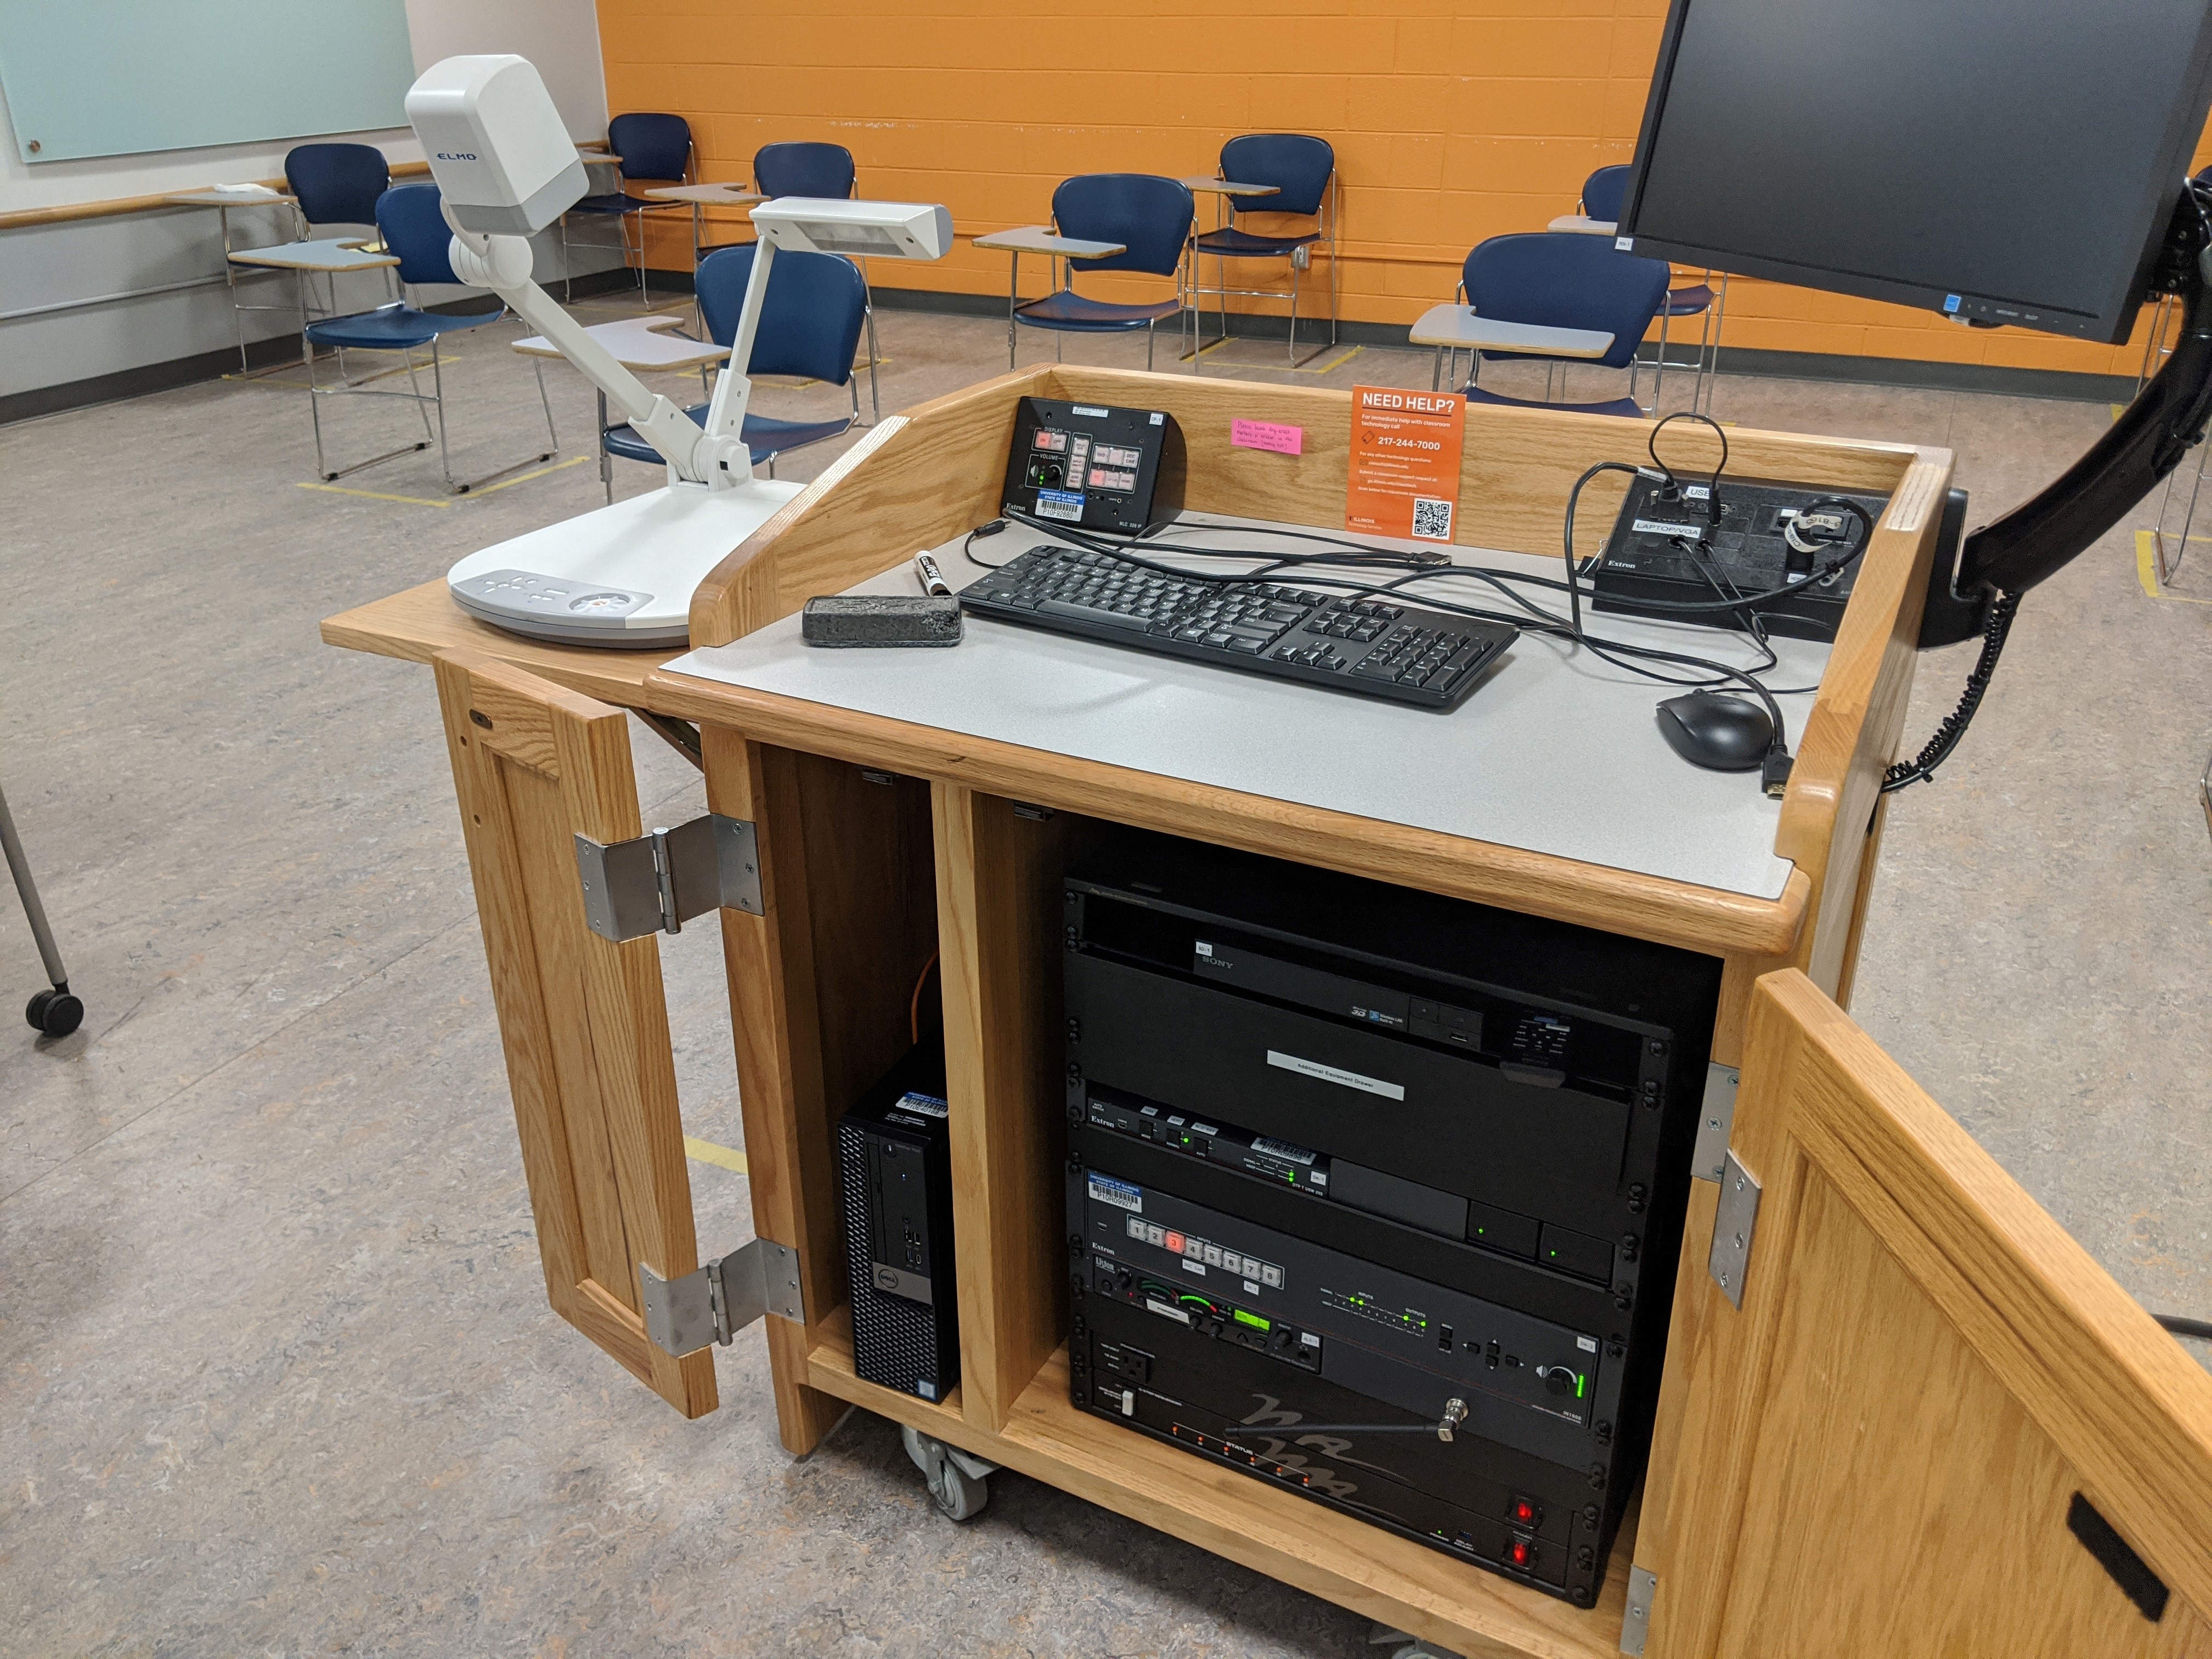 A view of the open cabinet with a PC, Document Camera, and HDMI inputs, a push button controller, and audio visual rack.